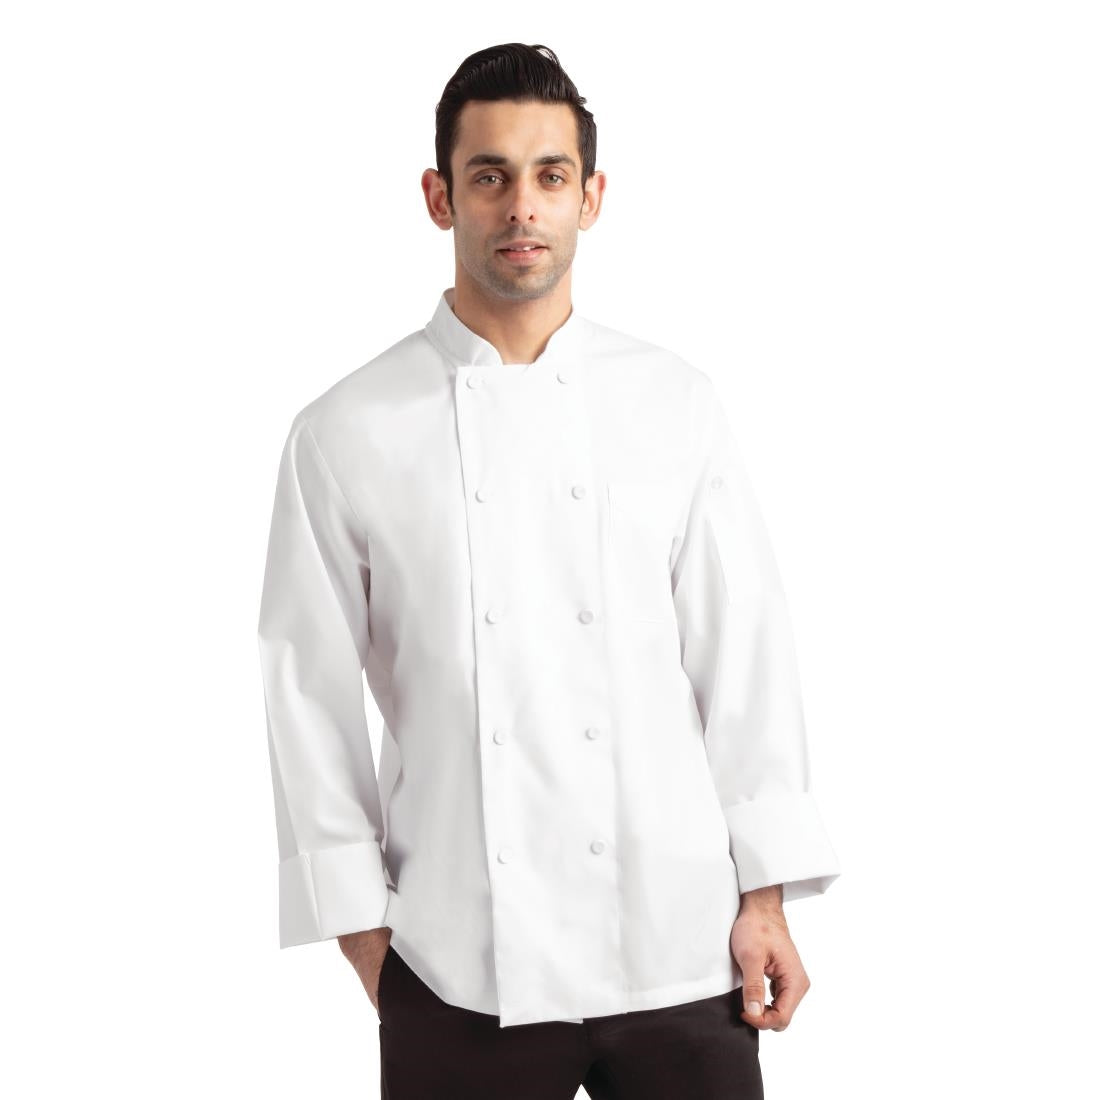 B649-S Chef Works Calgary Long Sleeve Cool Vent Unisex Chefs Jacket White S JD Catering Equipment Solutions Ltd